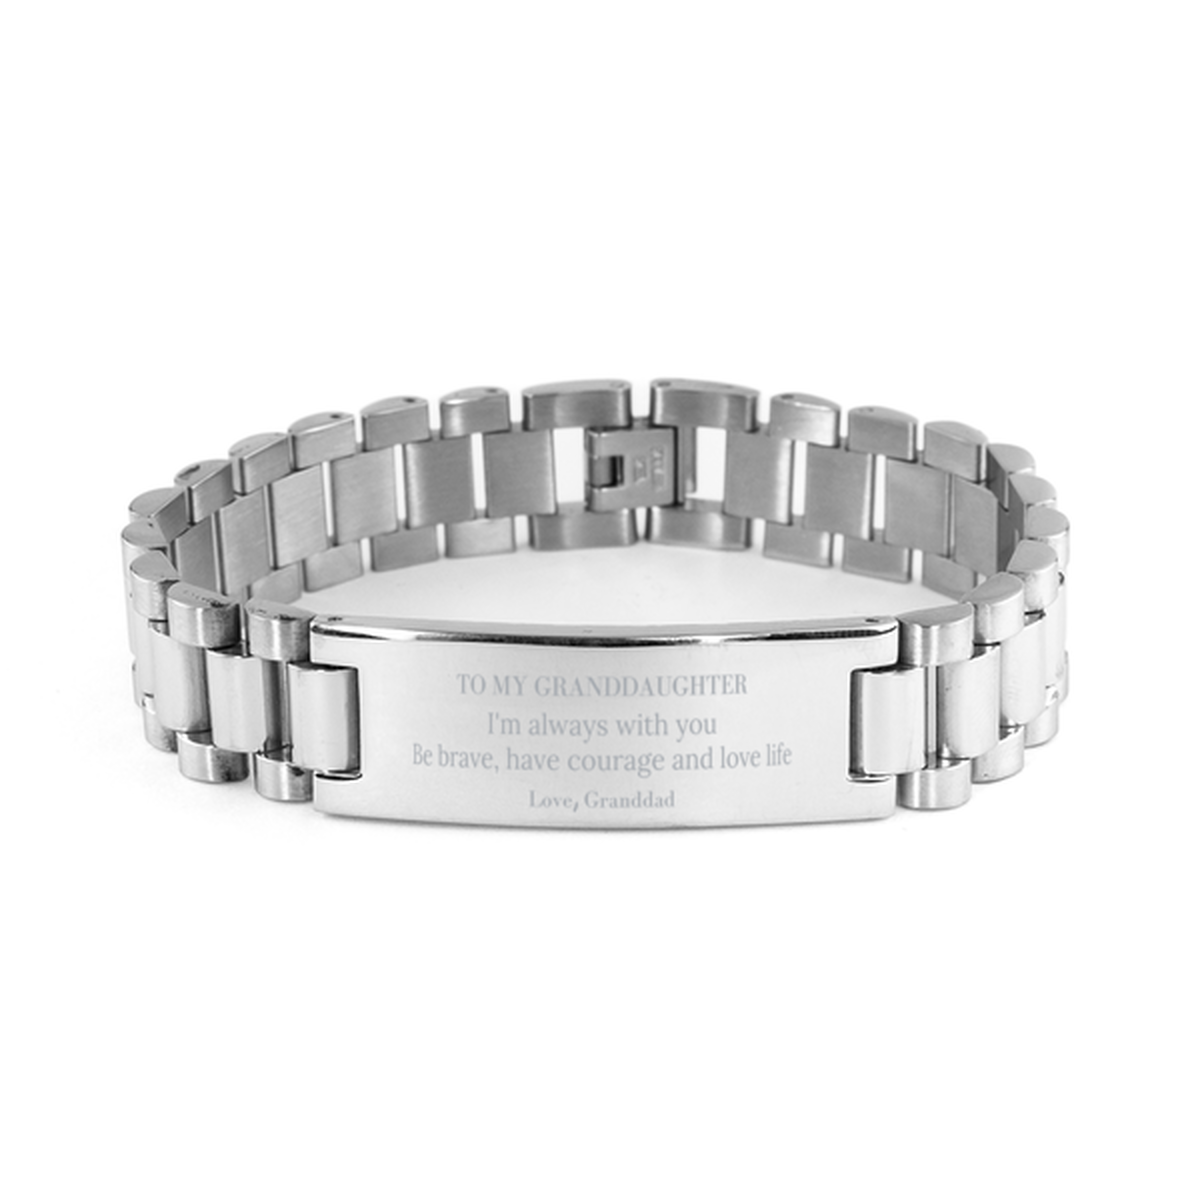 To My Granddaughter Gifts from Granddad, Unique Ladder Stainless Steel Bracelet Inspirational Christmas Birthday Graduation Gifts for Granddaughter I'm always with you. Be brave, have courage and love life. Love, Granddad